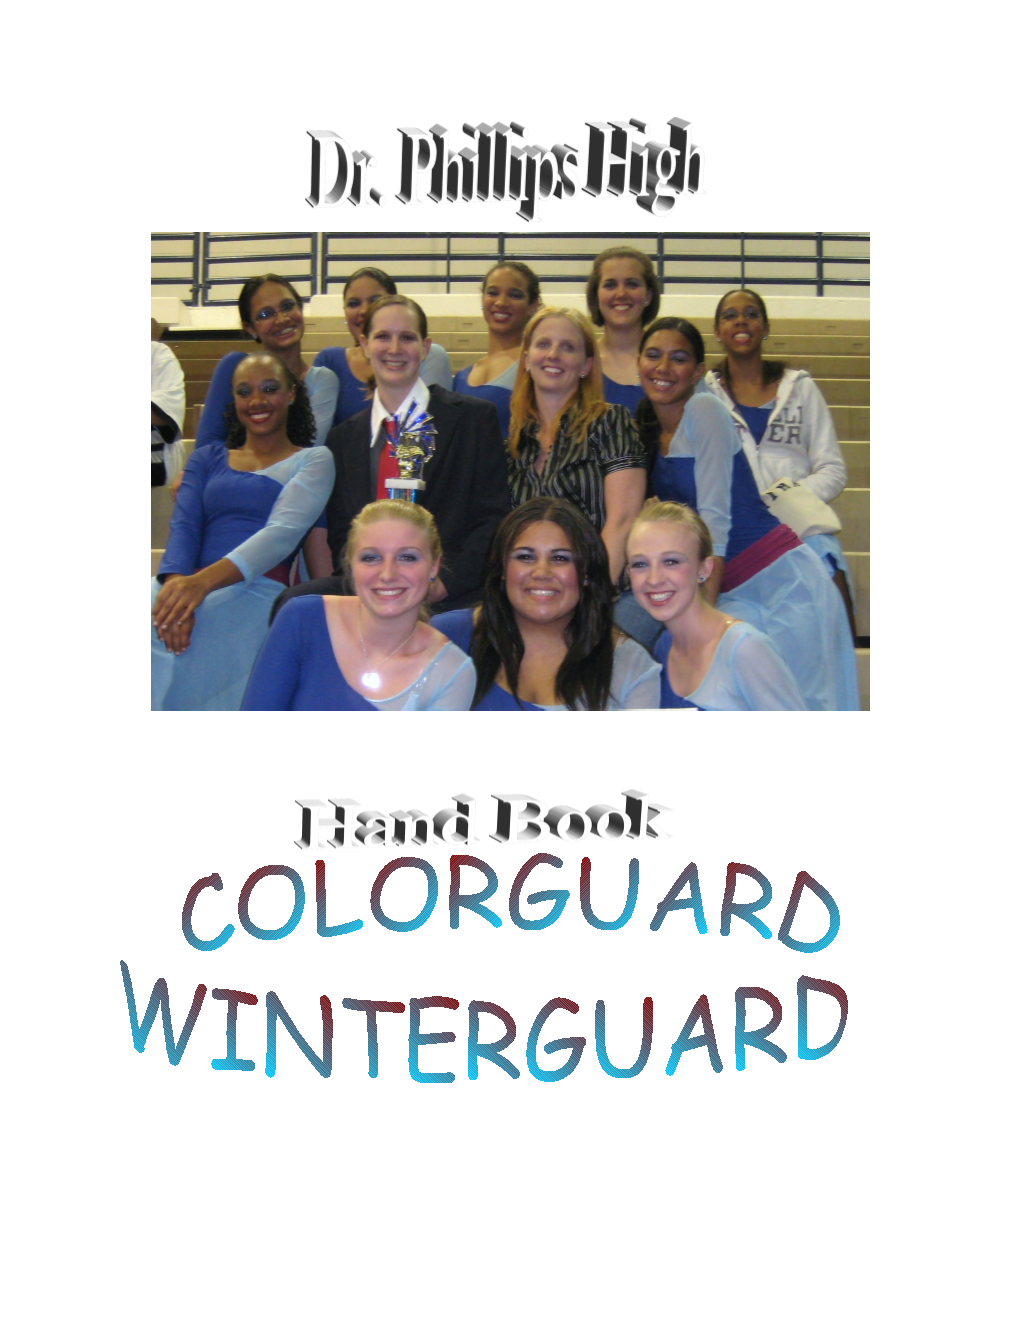 The Goal of the Dr. Phillips High School Guard Programs Is to Provide an Opportunity For